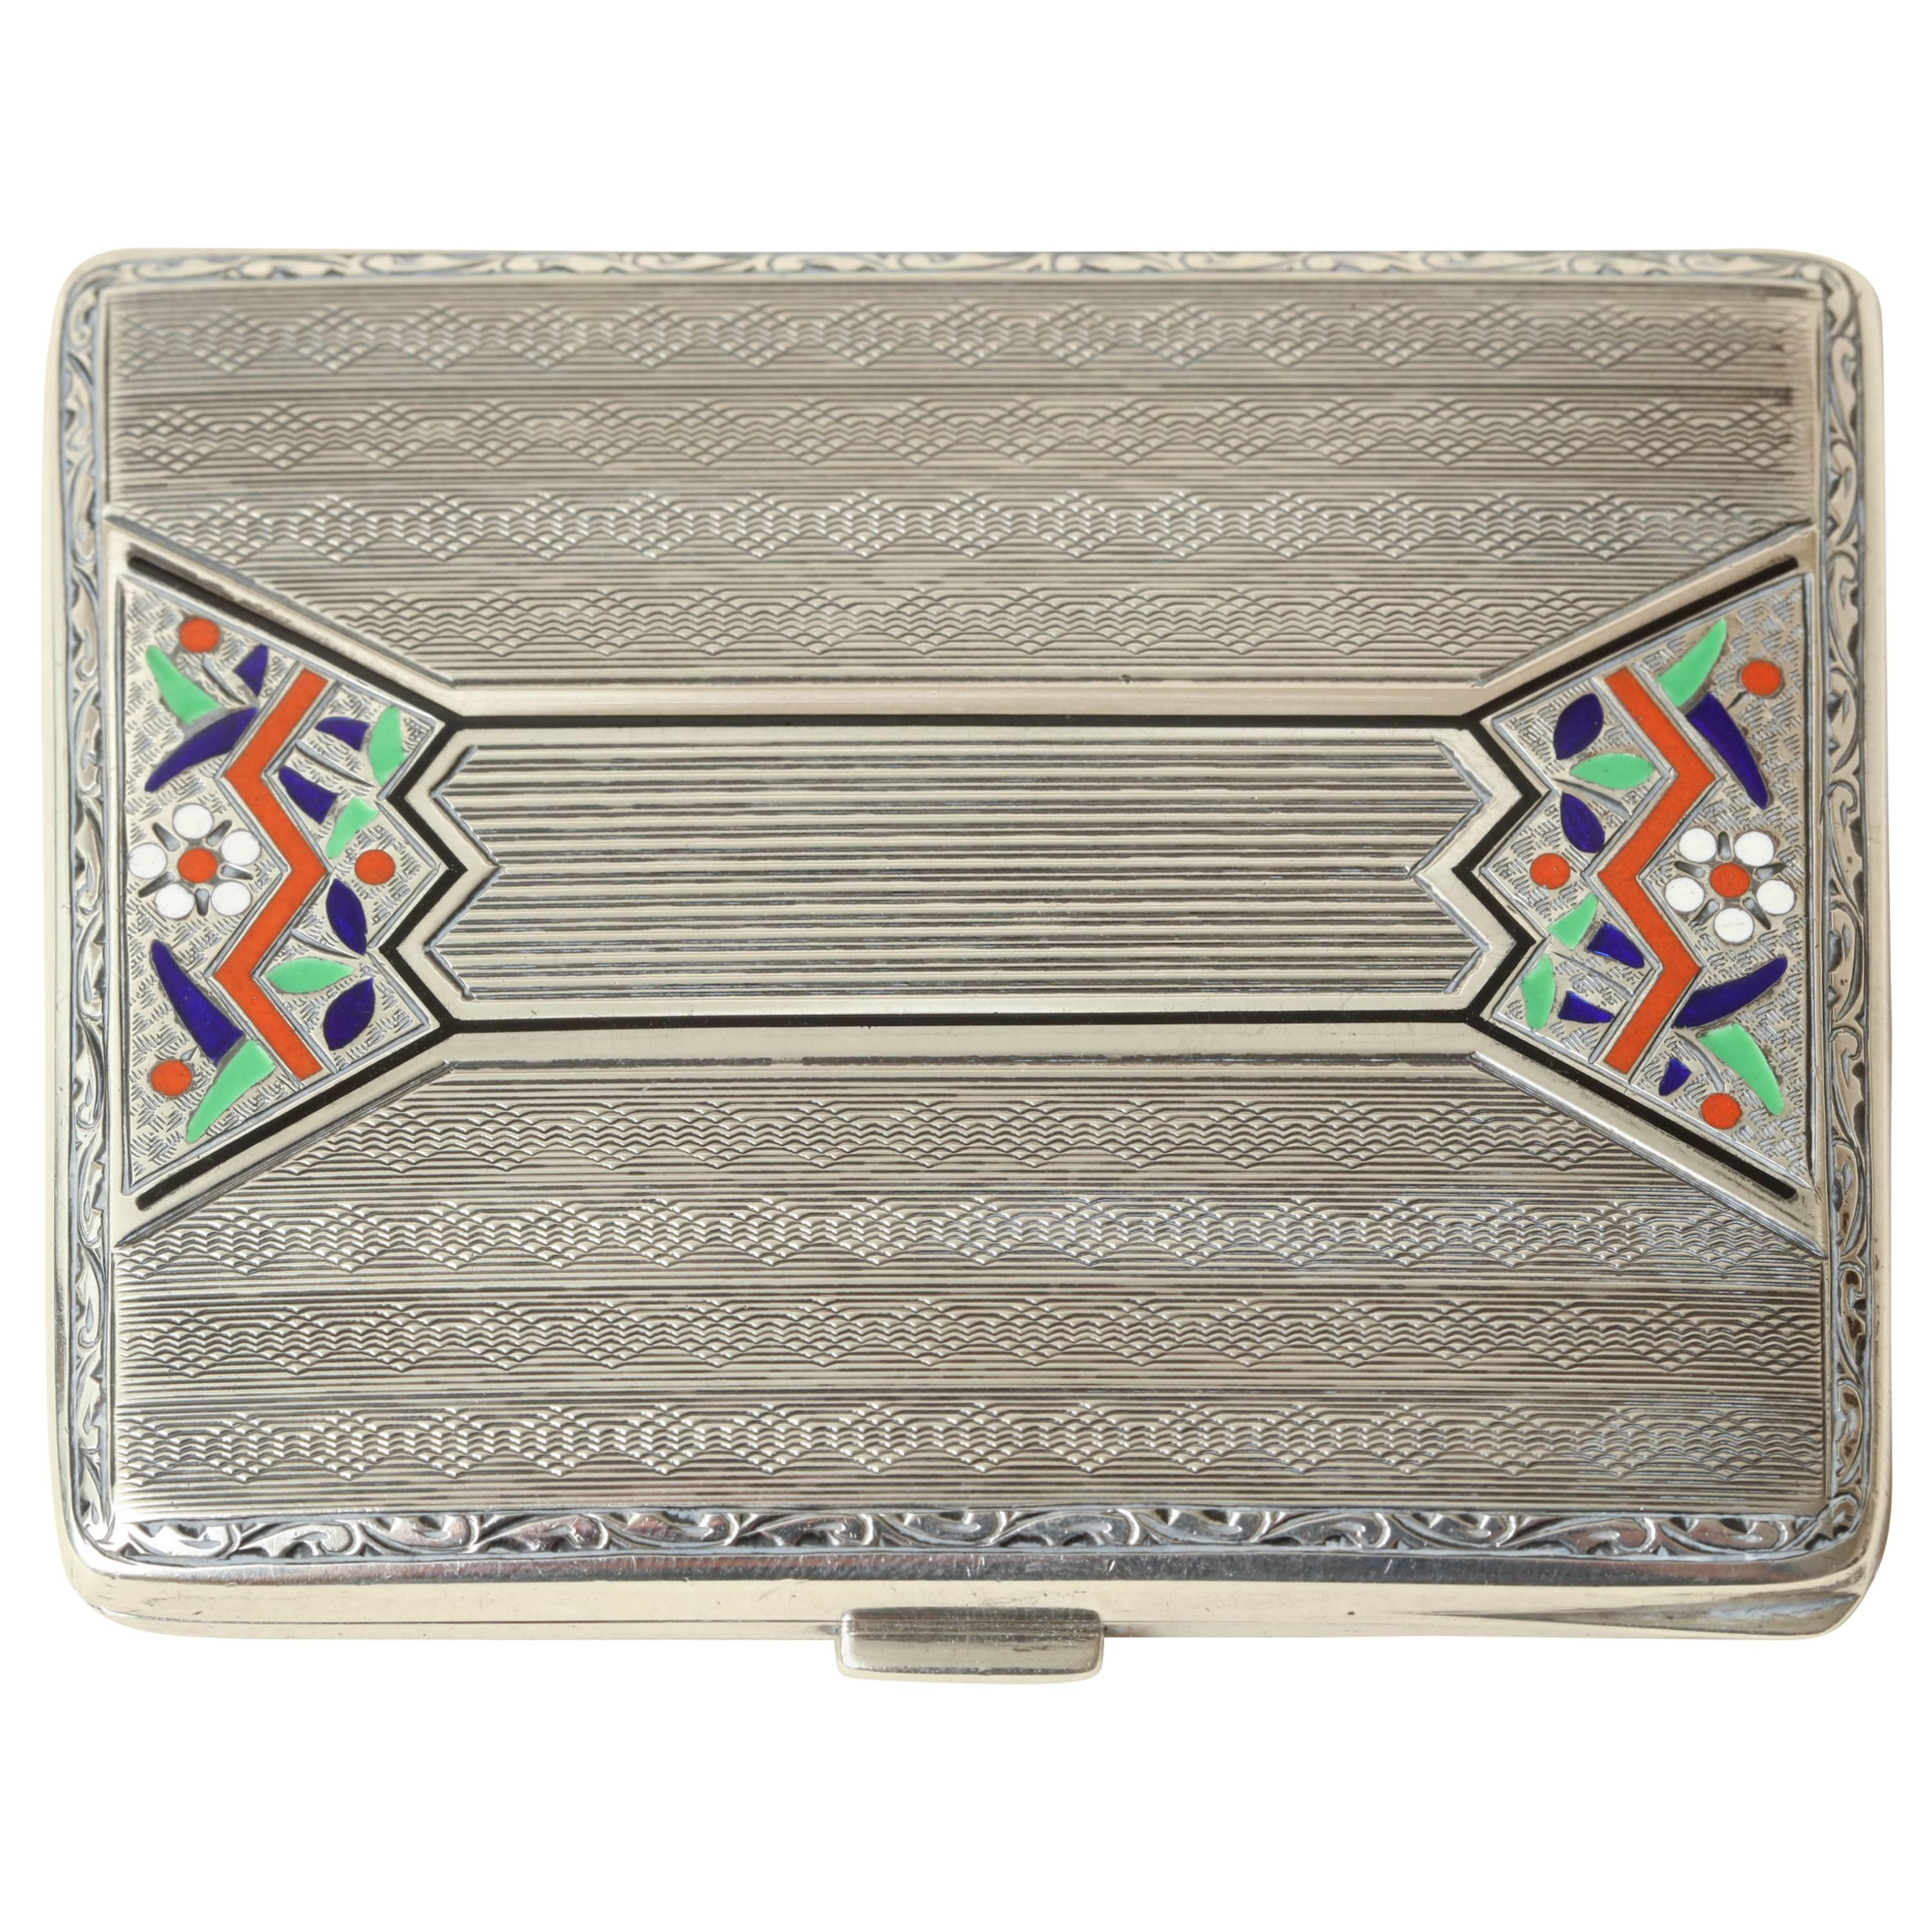 Continental Art Deco Sterling Silver and Champleve Enamel Cigarette Case